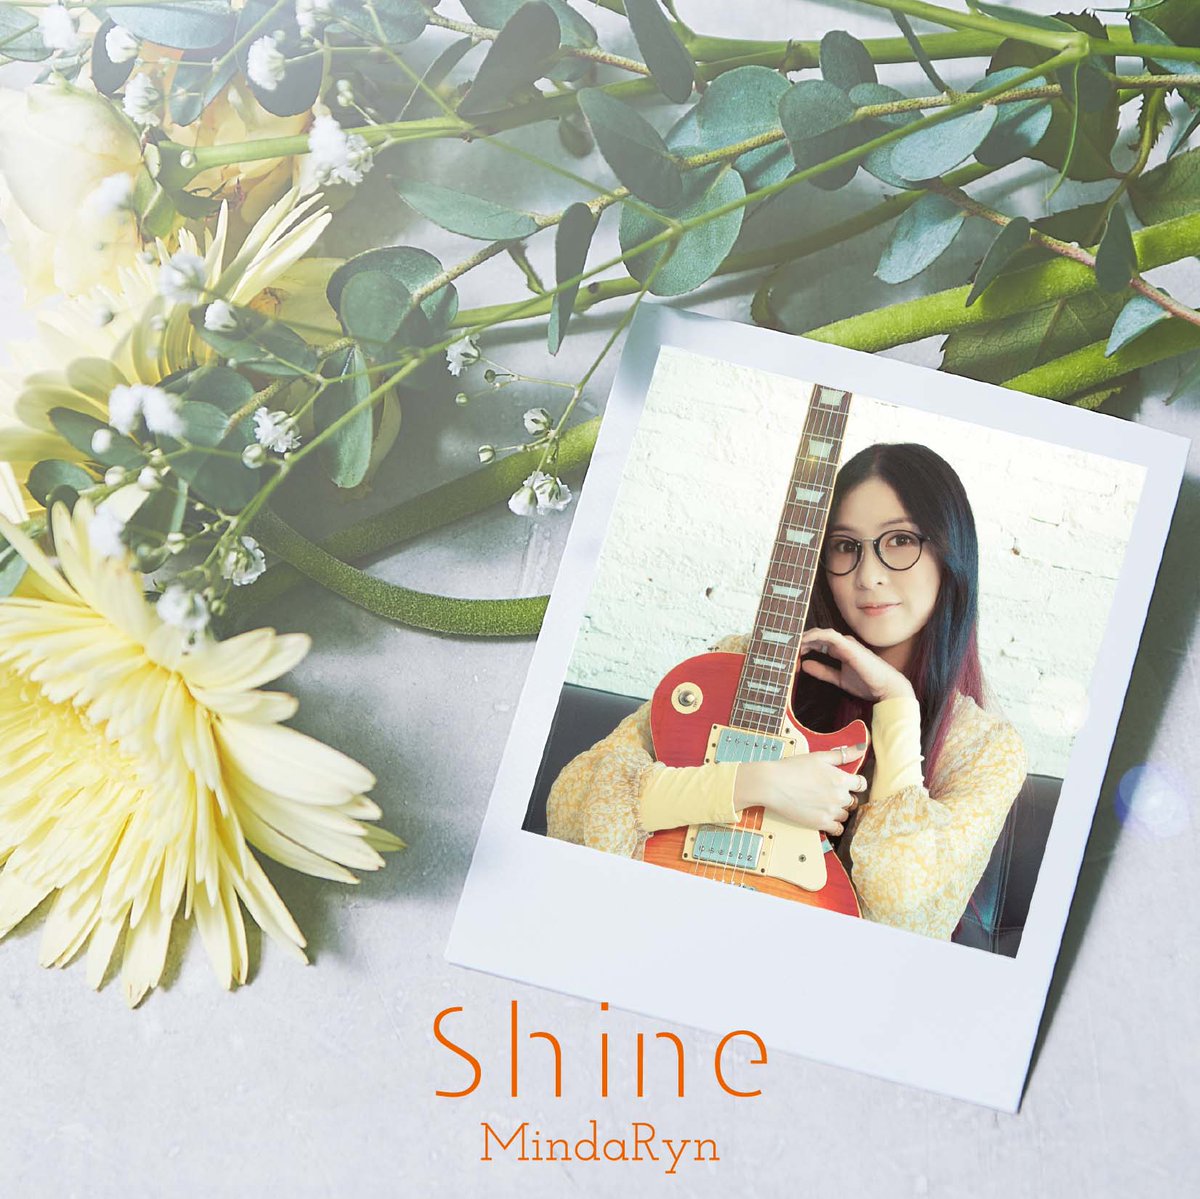 Cover art for『MindaRyn - Because of you』from the release『Shine』